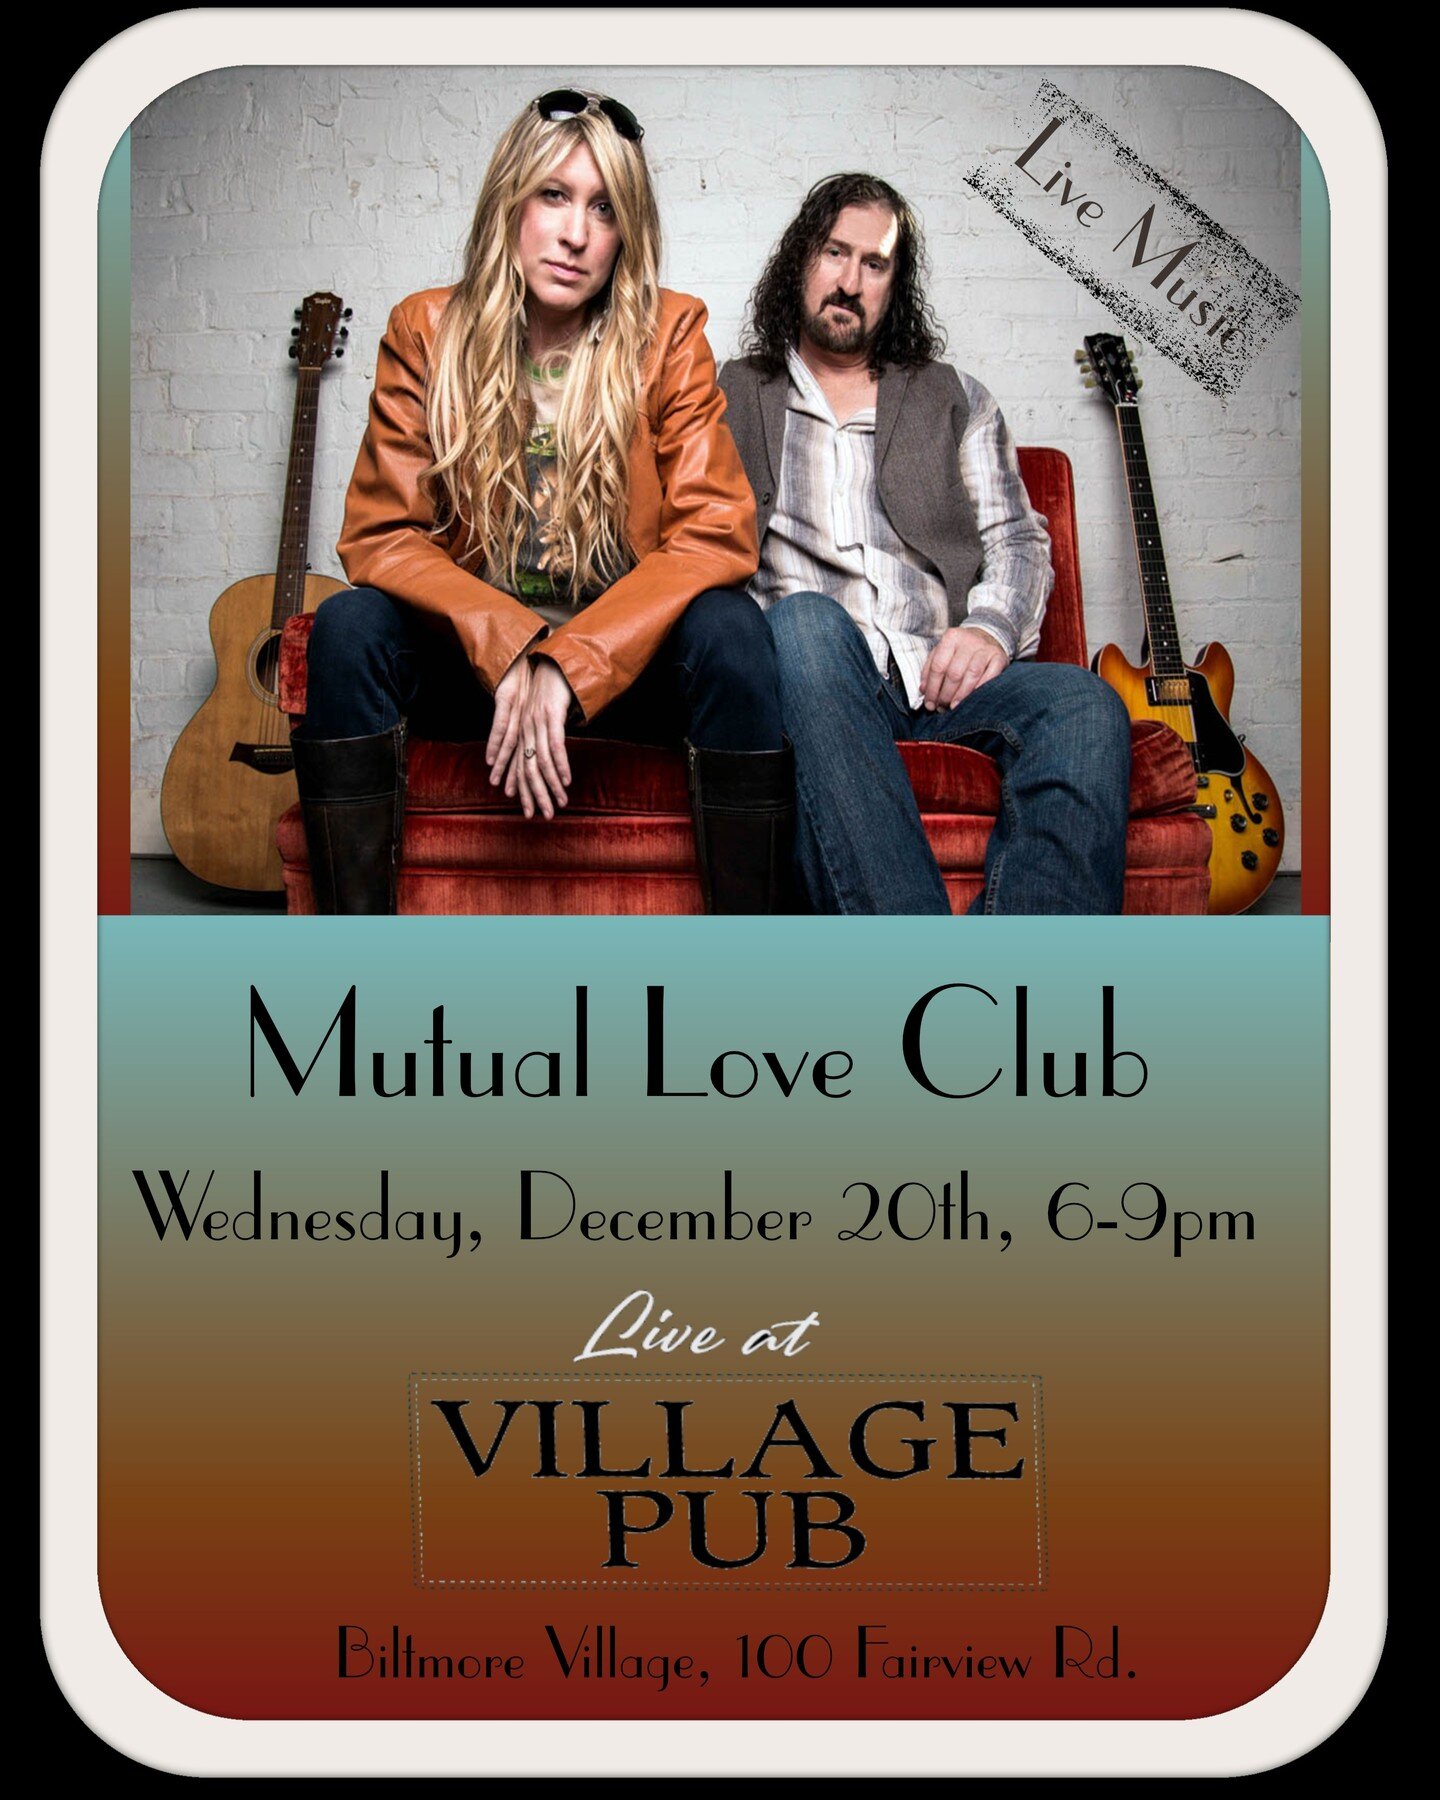 Tomorrow @villagepubasheville 6-9pm
Come join us for live music!